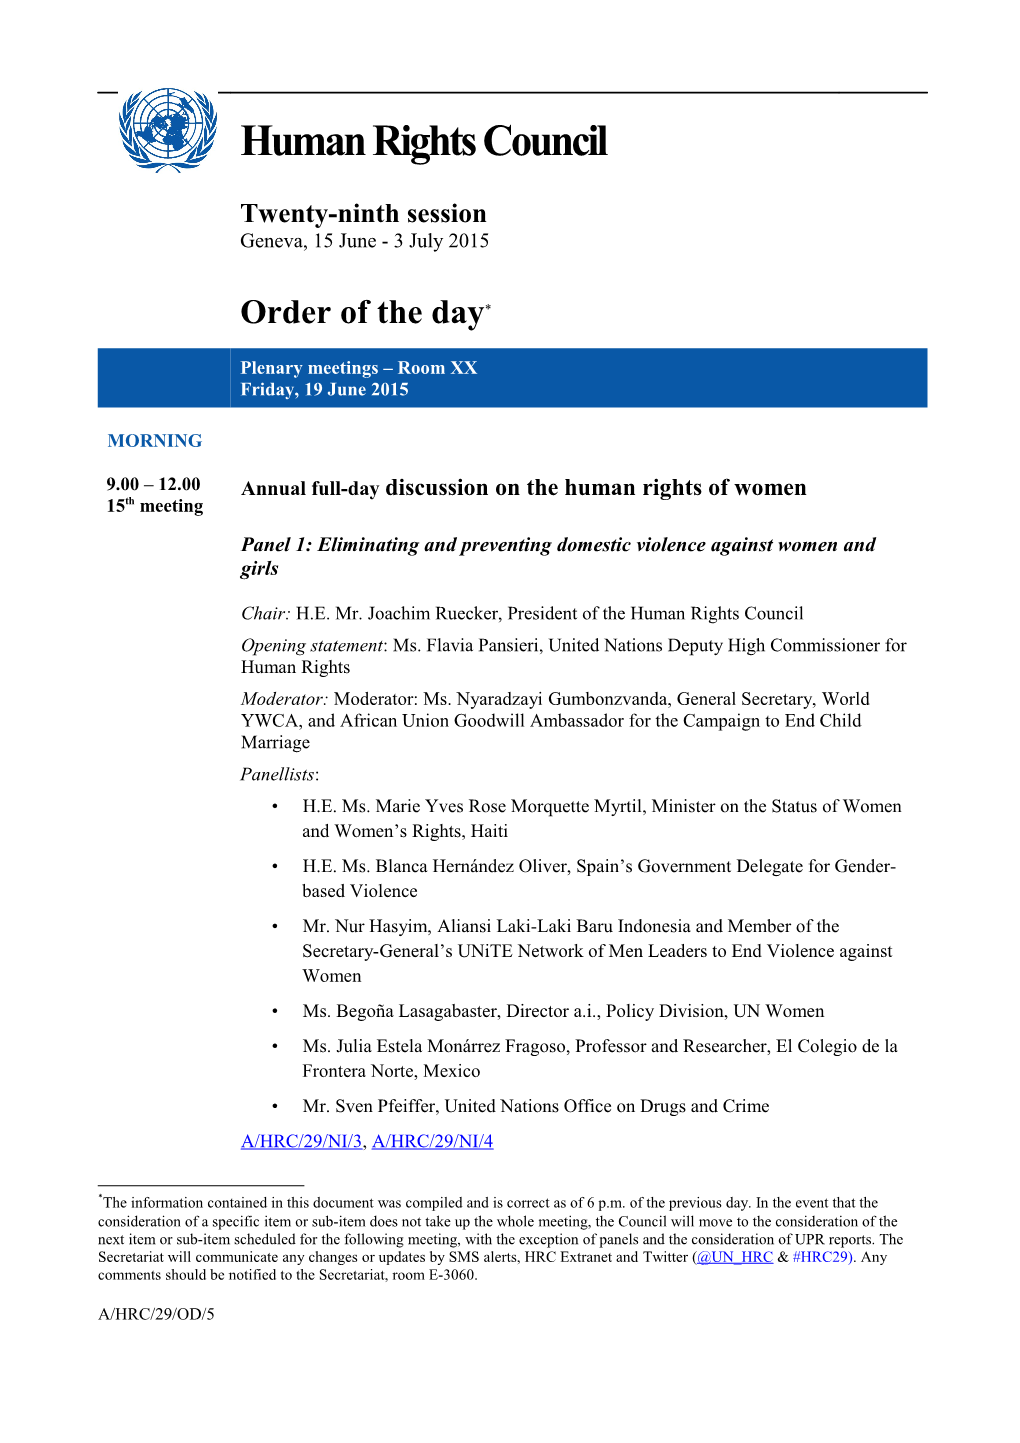 Order of the Day, Friday 19 June 2015